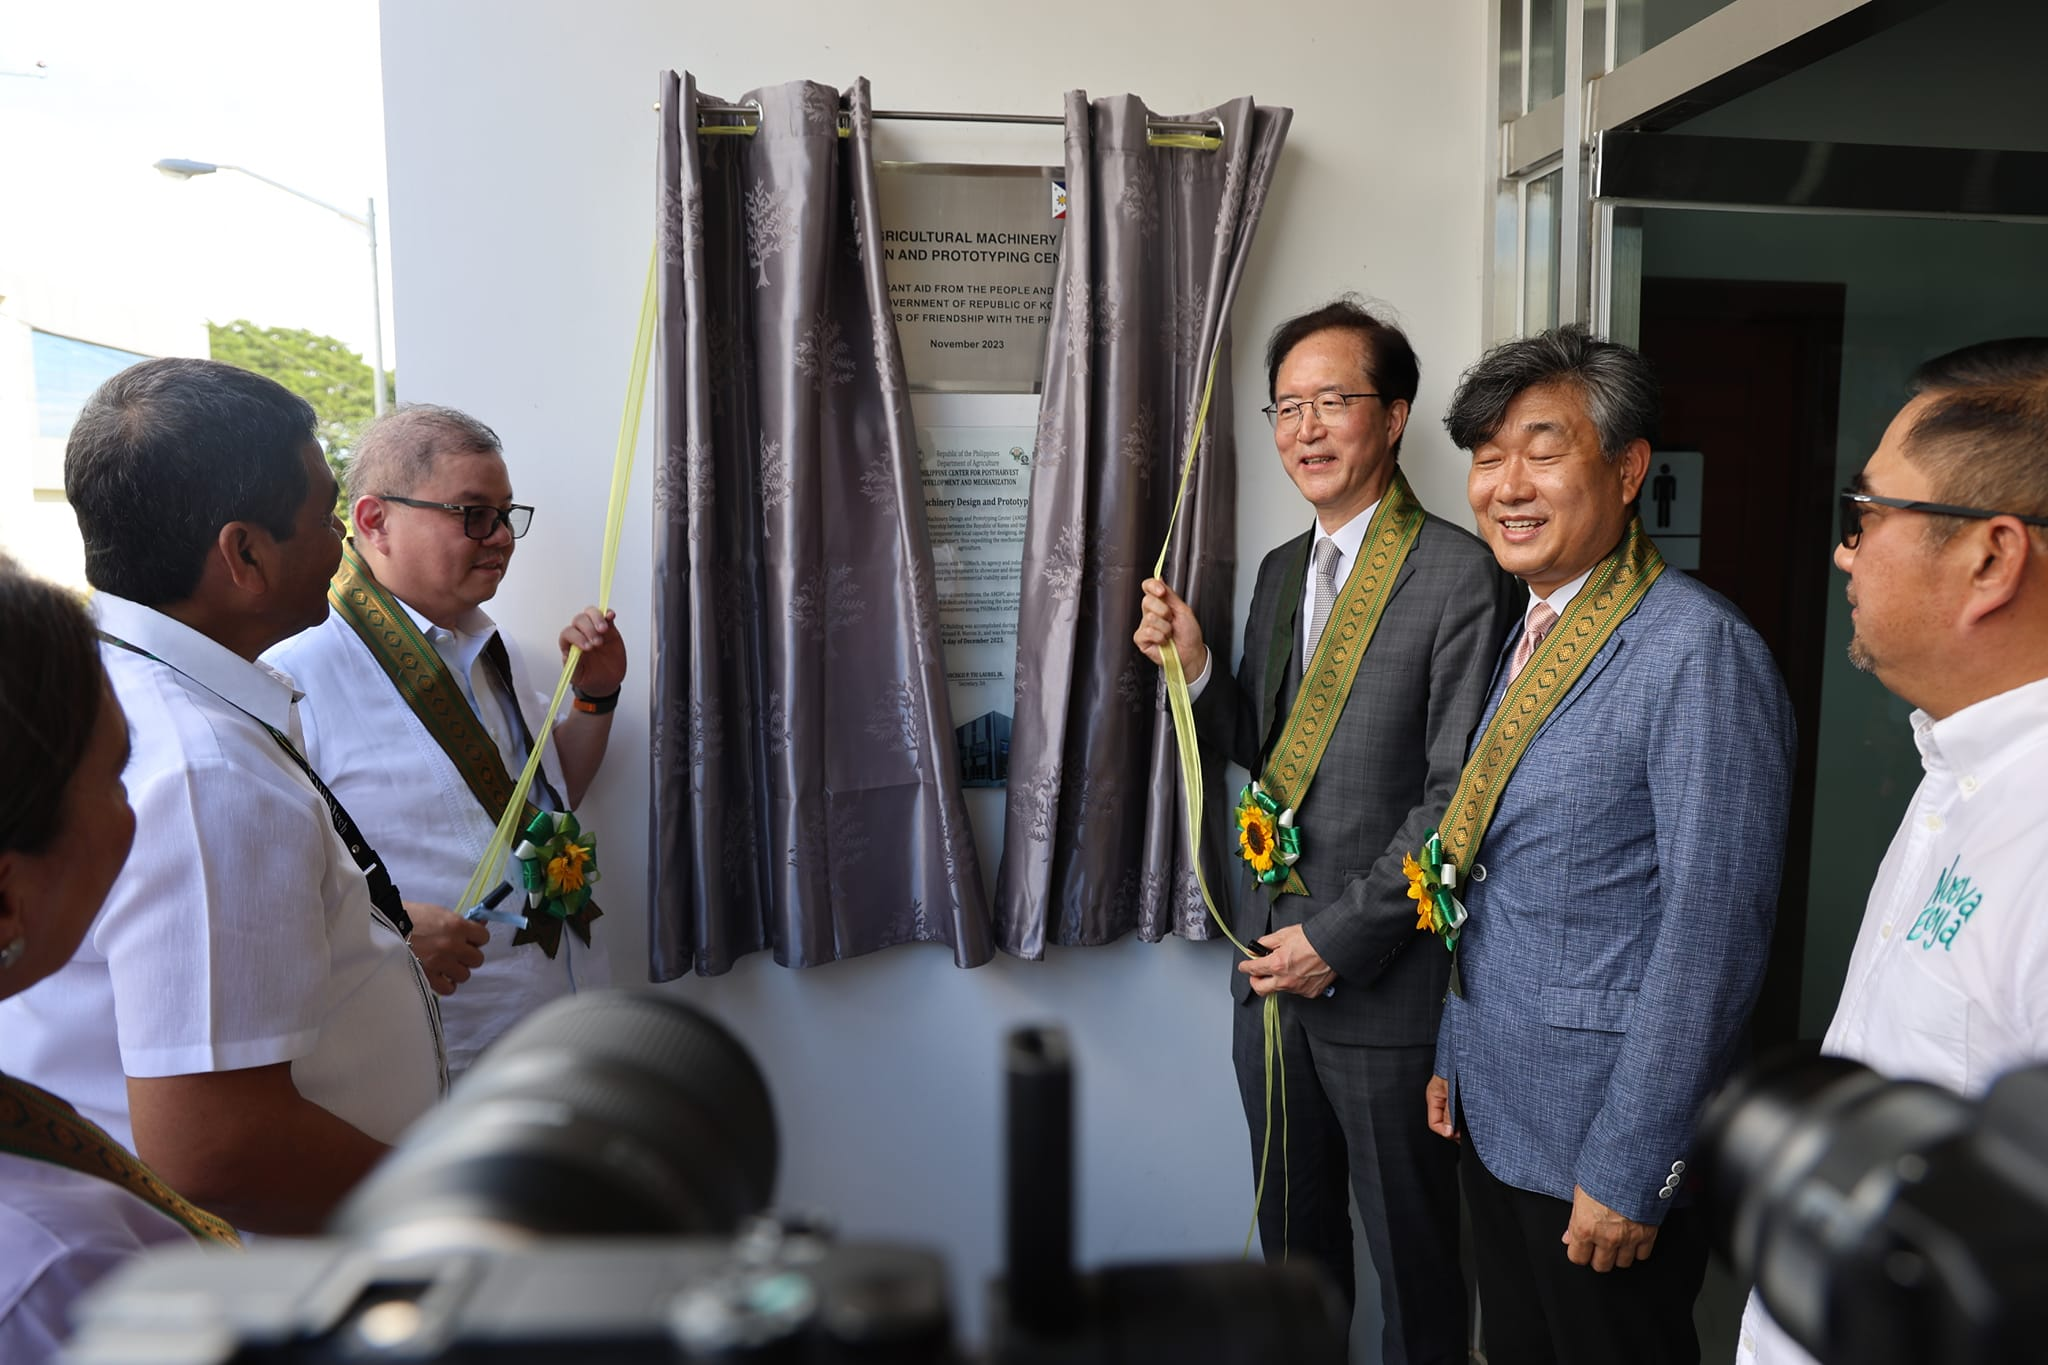 Agricultural Machinery Design &amp; Prototyping Center unveiled in N. Ecija